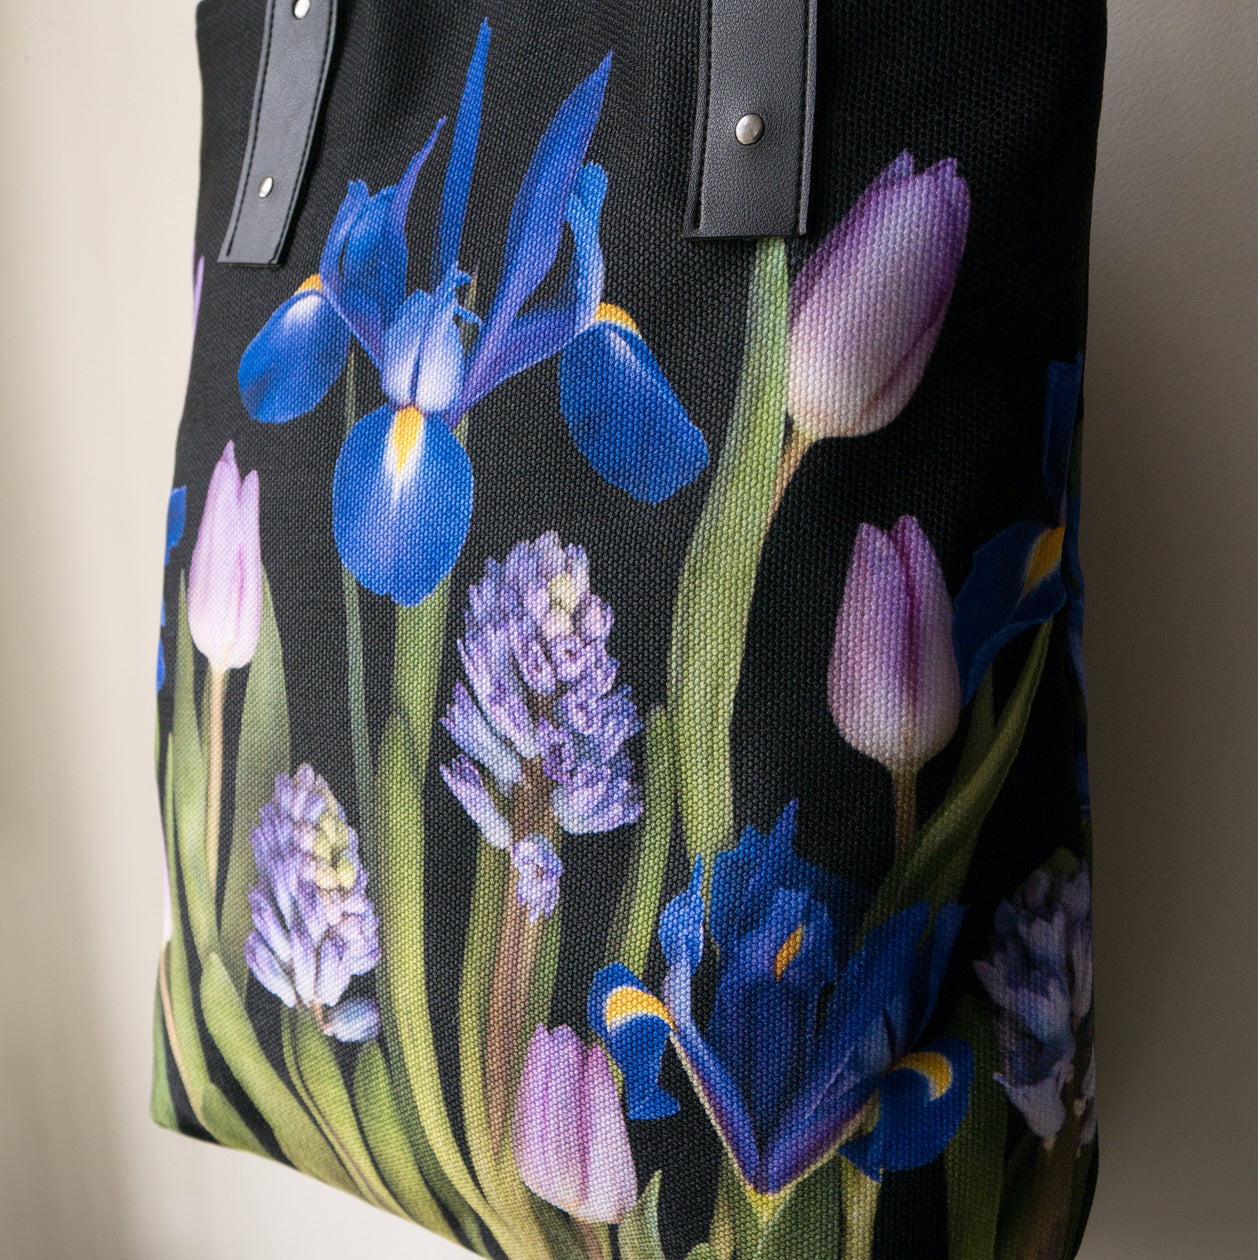 Floral Tote Bag - iris and spring flowers